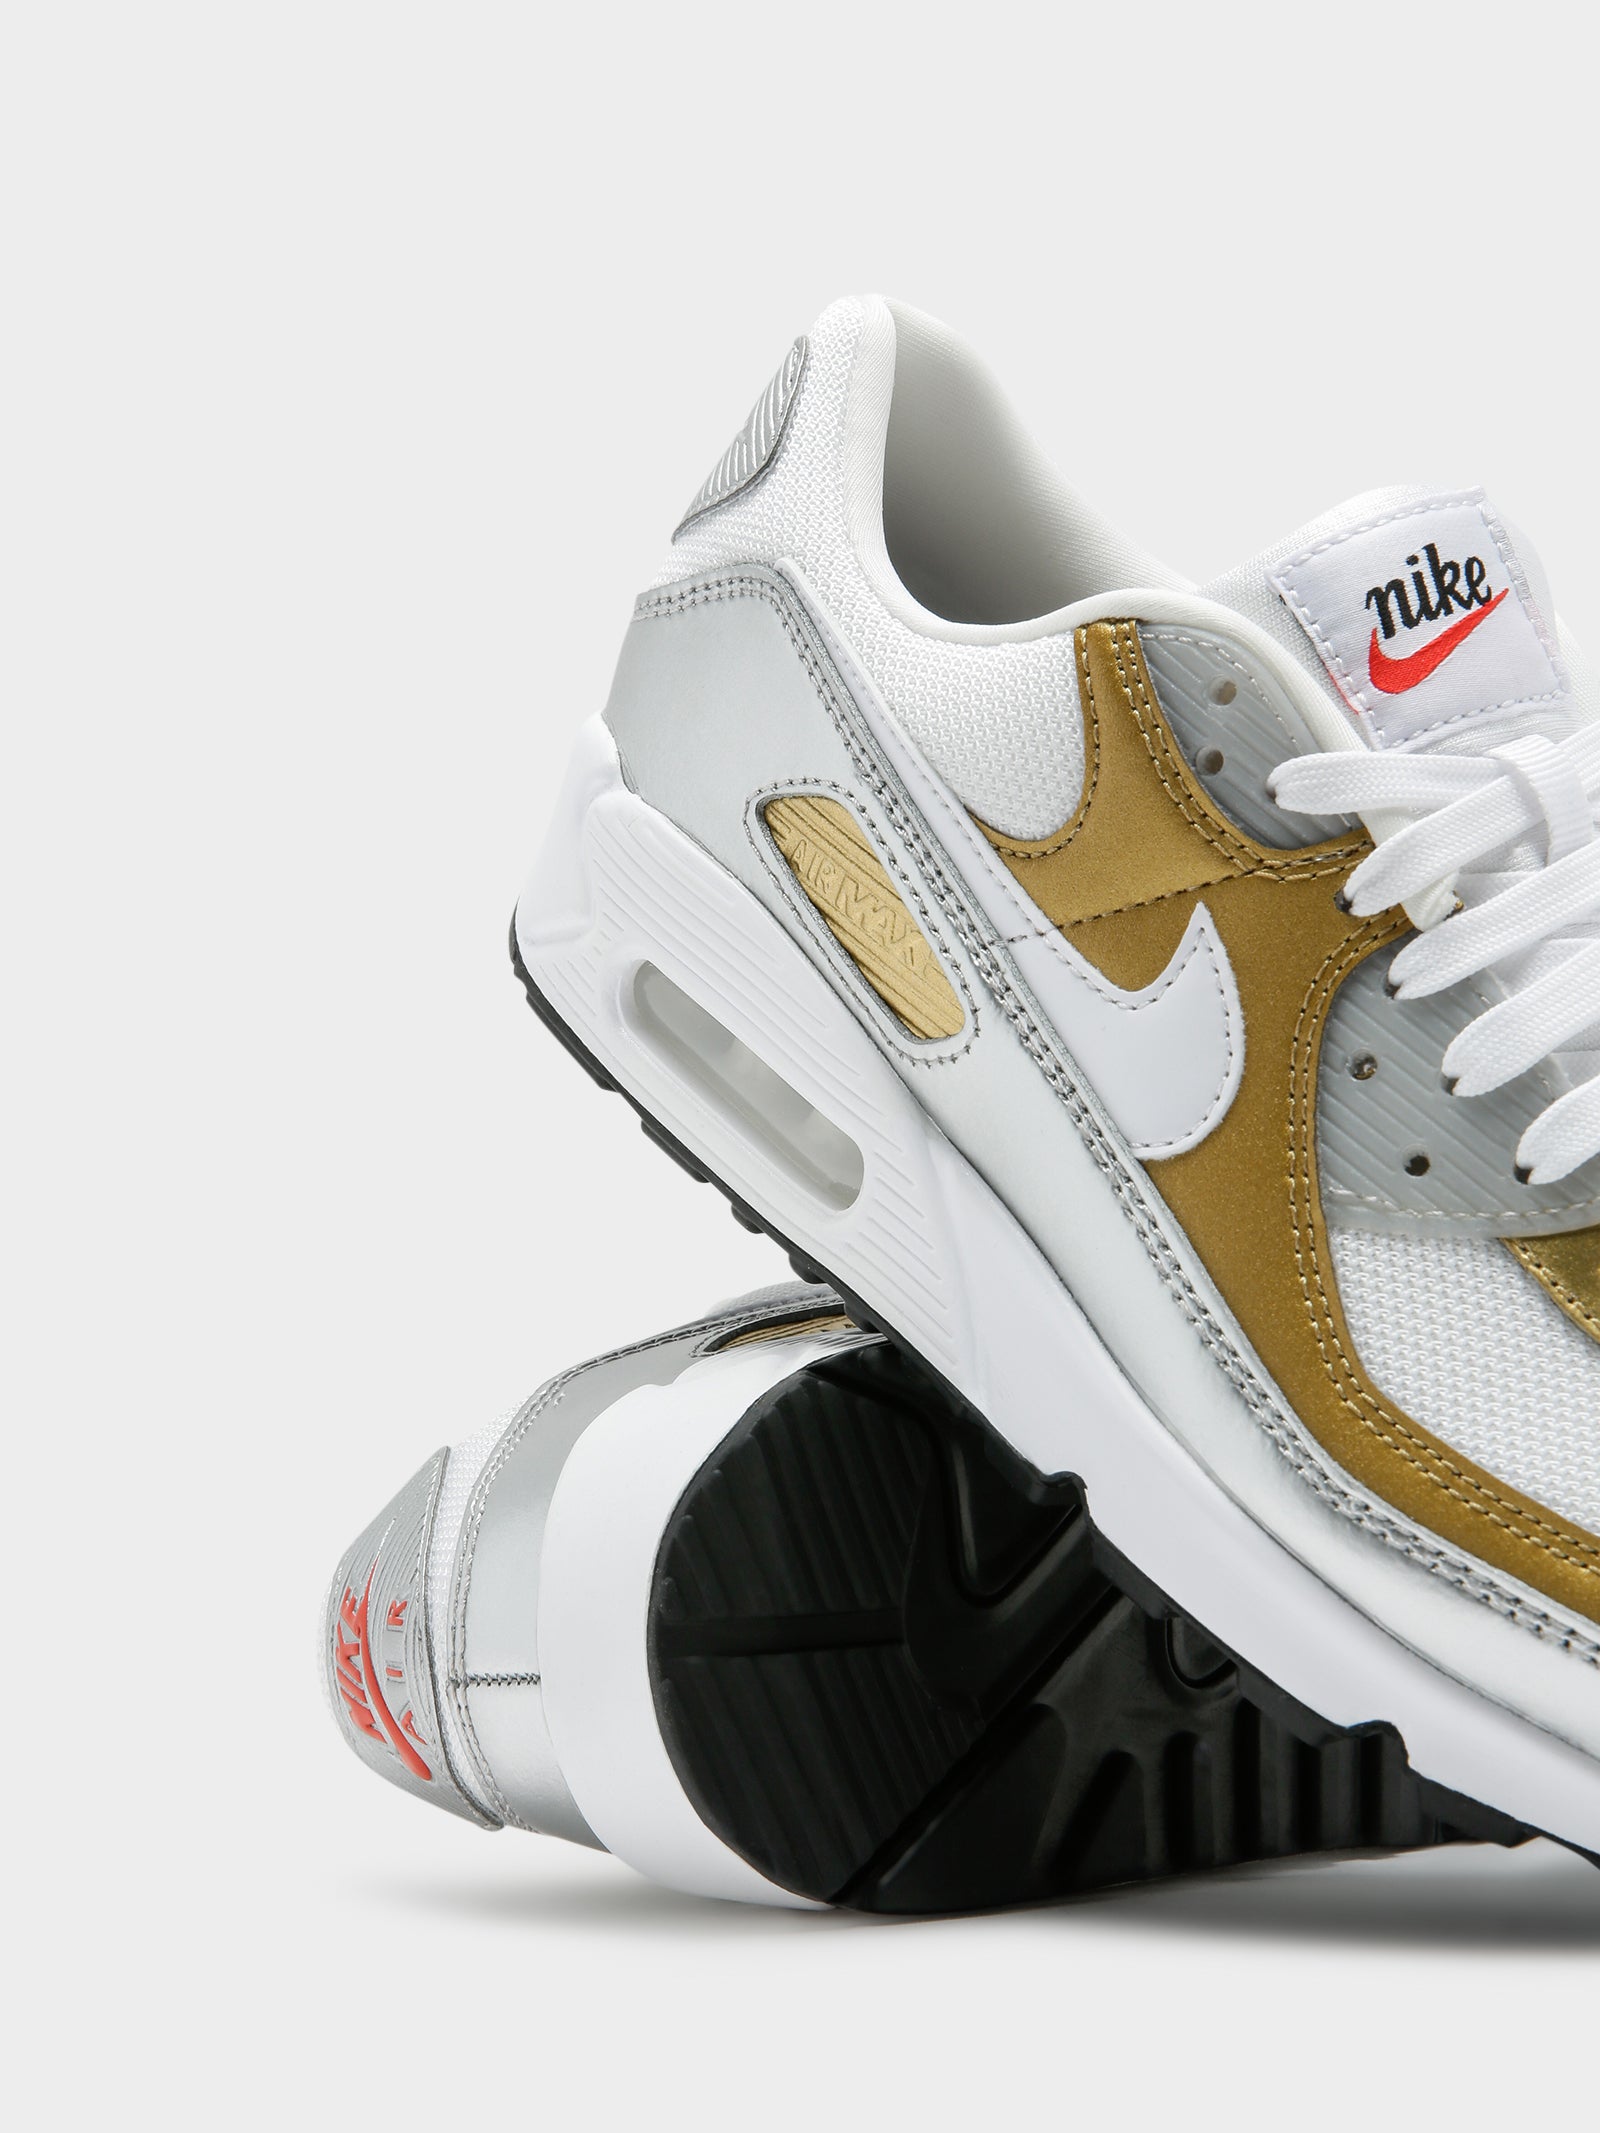 Womens Air Max 90 Sneakers in Gold & Grey - Glue Store